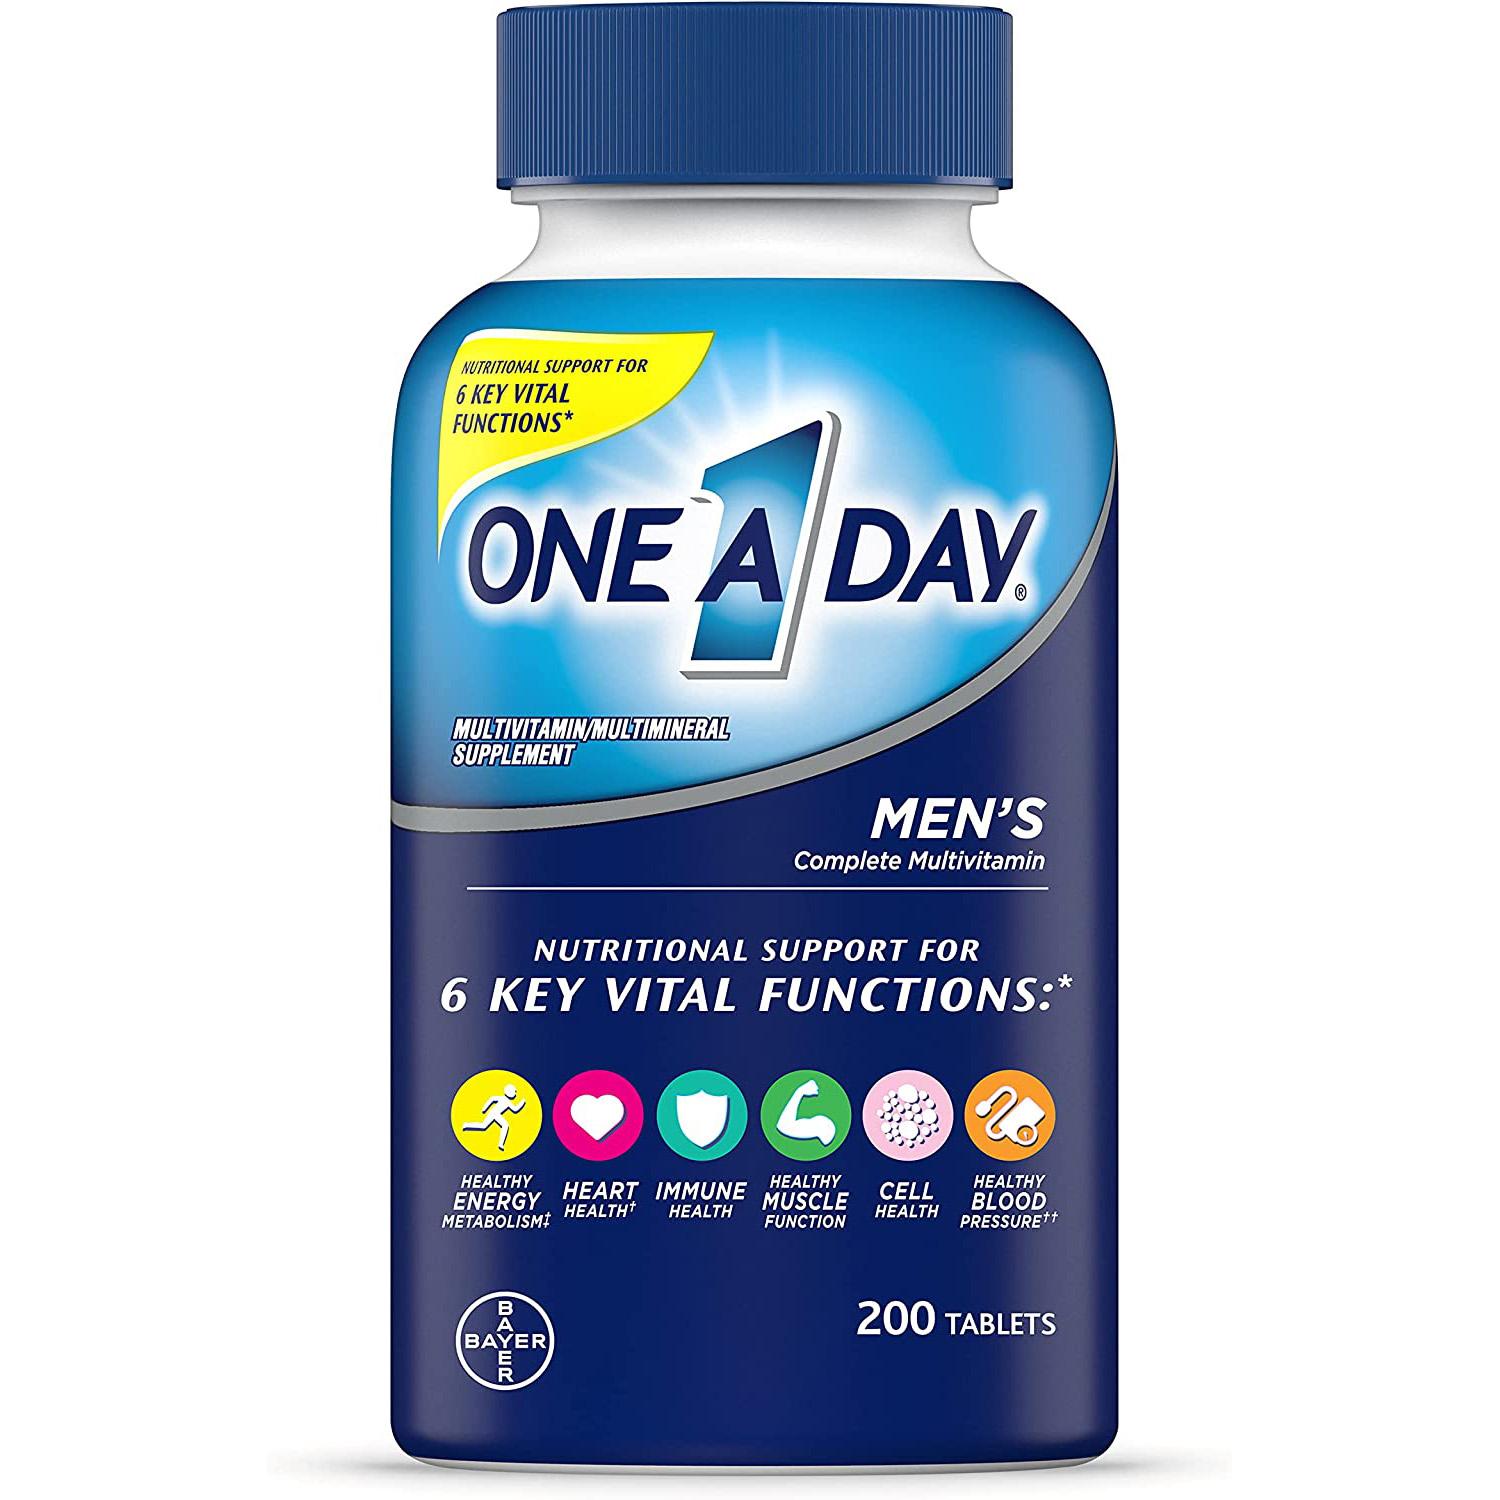 One A Day Complete Multivitamin Supplement for $7.97 Shipped